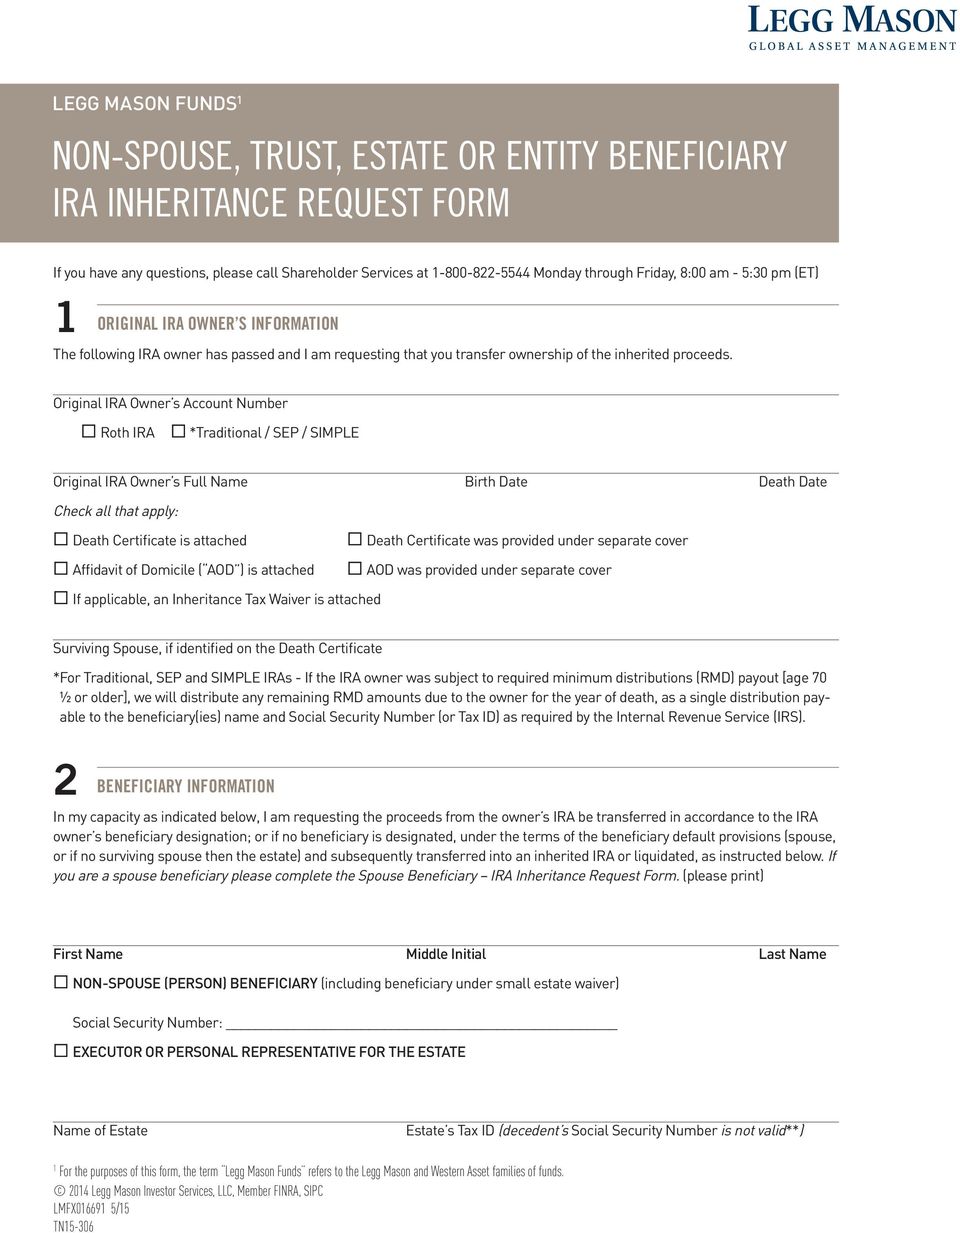 Original IRA Owner s Account Number Roth IRA *Traditional / SEP / SIMPLE Original IRA Owner s Full Name Birth Date Death Date Check all that apply: Death Certificate is attached Affidavit of Domicile